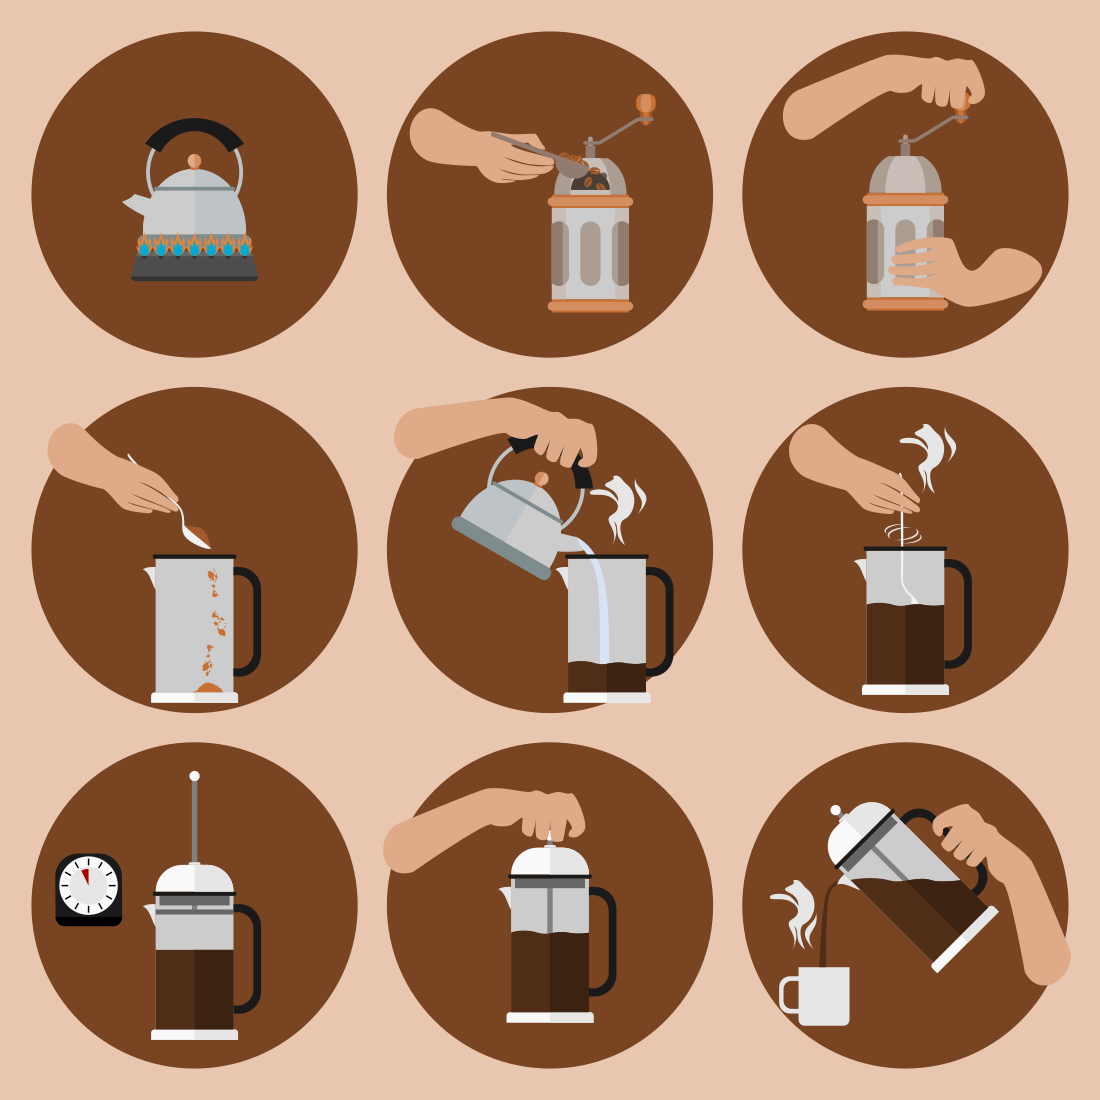 French Press Coffee Instruction Icons cover image.